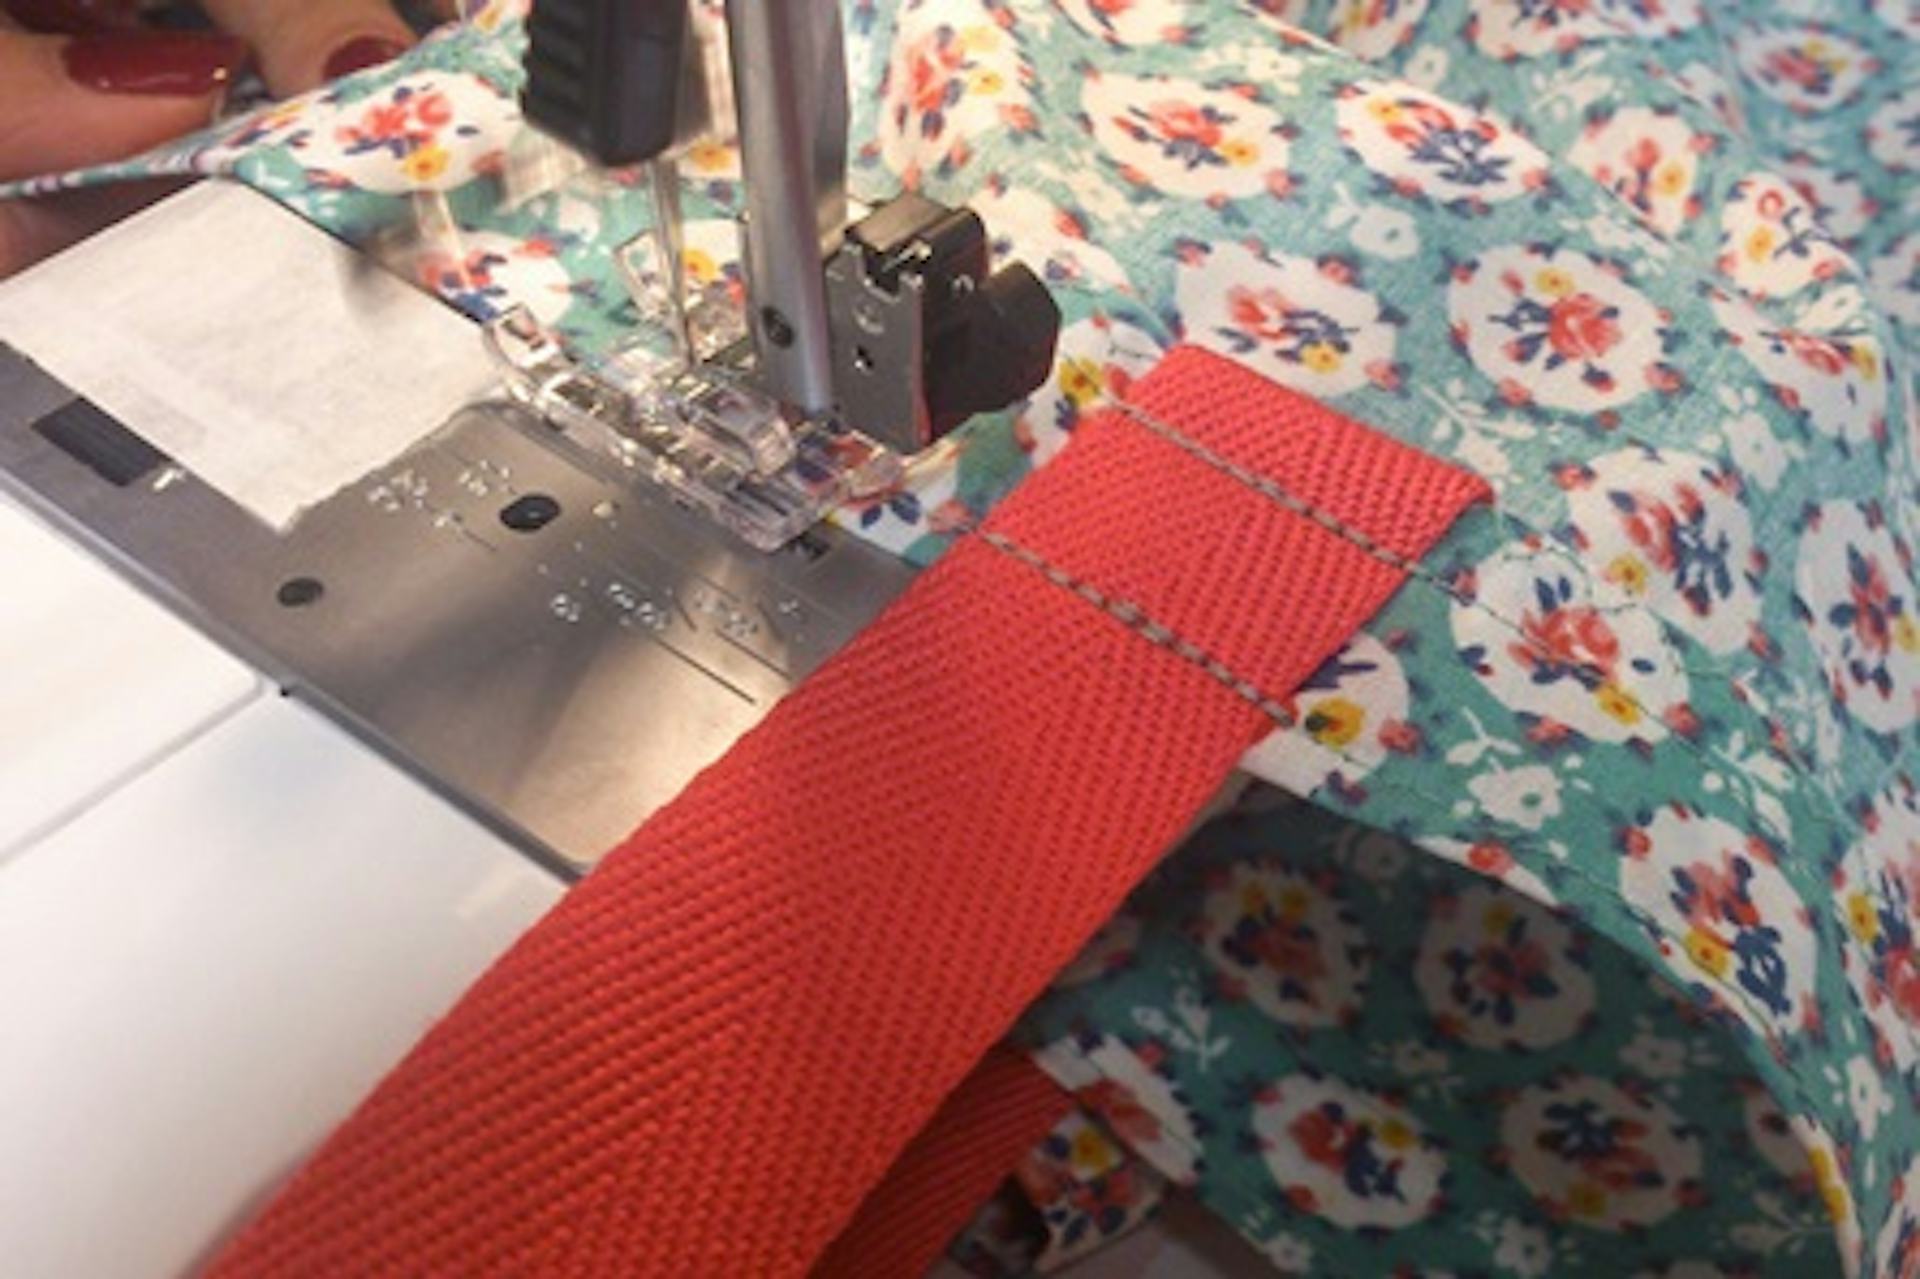 Beginners Sewing Workshop with Sew in Brighton